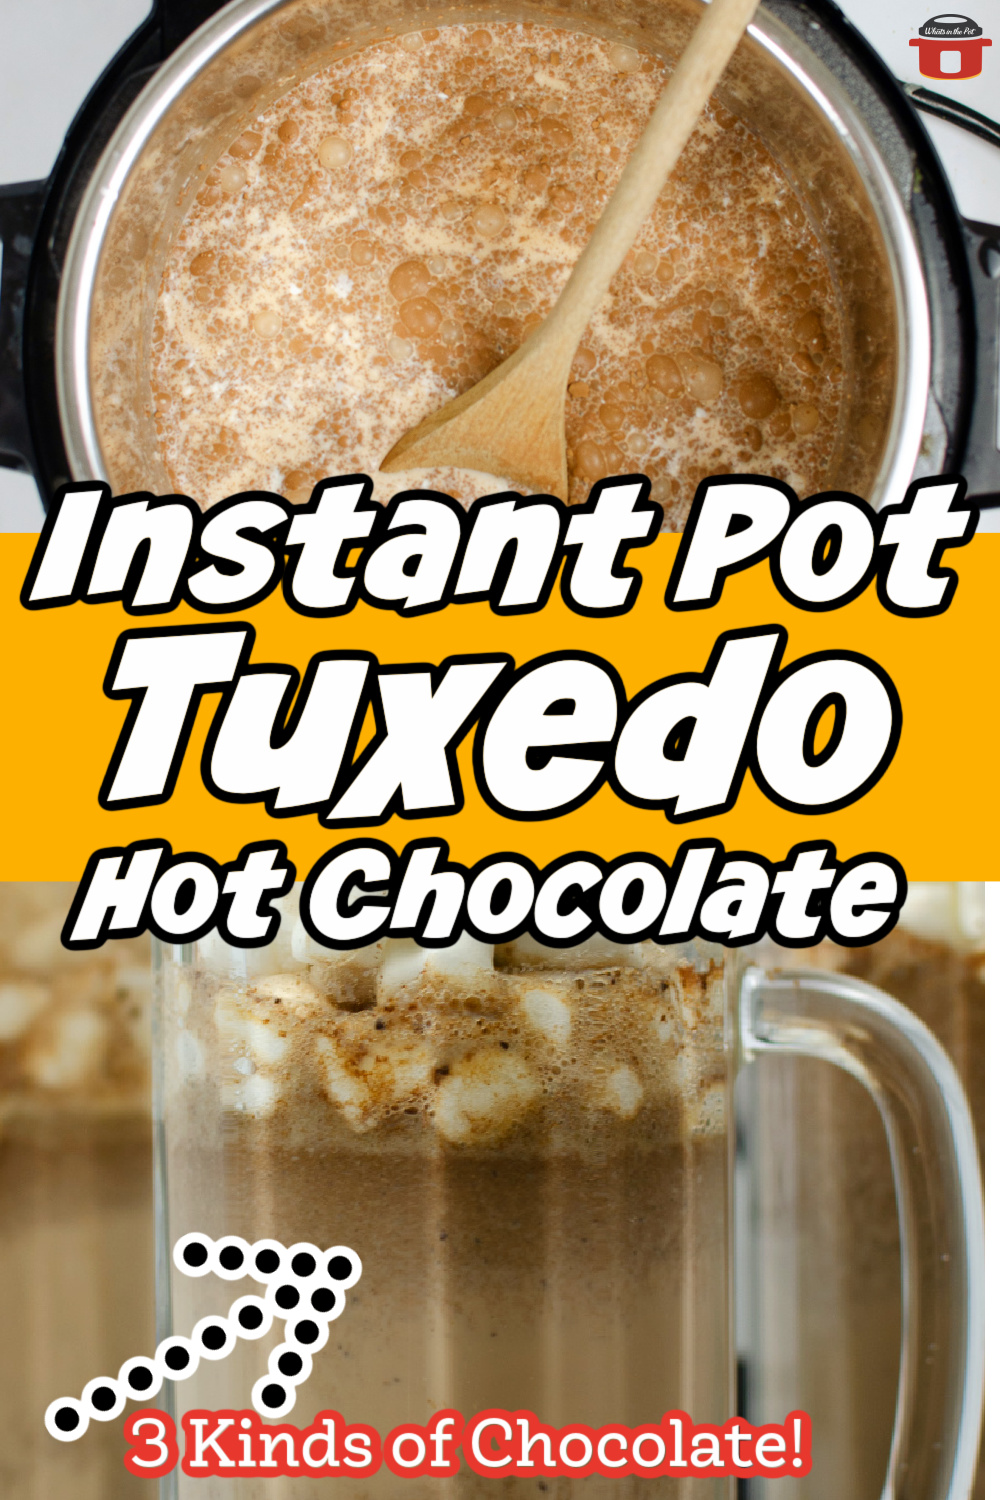 When you’re looking for a cozy way to boost your mood with something sweet and comforting, consider making this delicious Instant Pot Starbucks Tuxedo Hot Chocolate Recipe. This easy-to-make hot chocolate recipe is made with homemade whipped cream that adds creamy flavor and texture to the decadent blend of semi-sweet and white chocolates in each cup. Perfect for chilly winter days or fun weekend sippers, this tasty treat will quickly become a favorite go-to warming beverage!